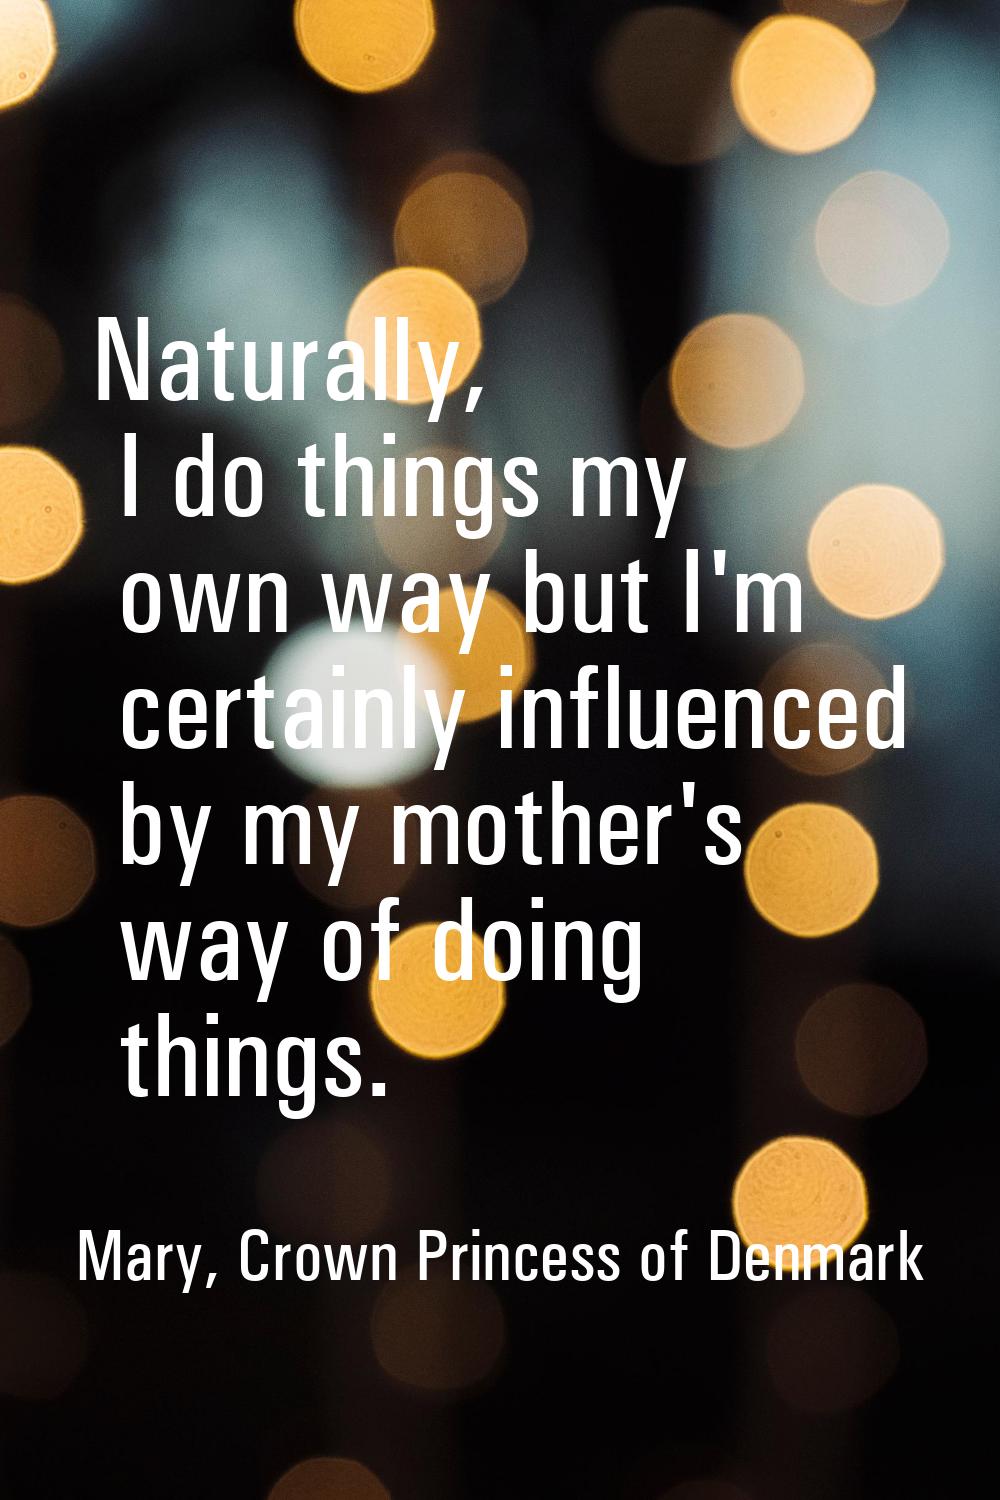 Naturally, I do things my own way but I'm certainly influenced by my mother's way of doing things.